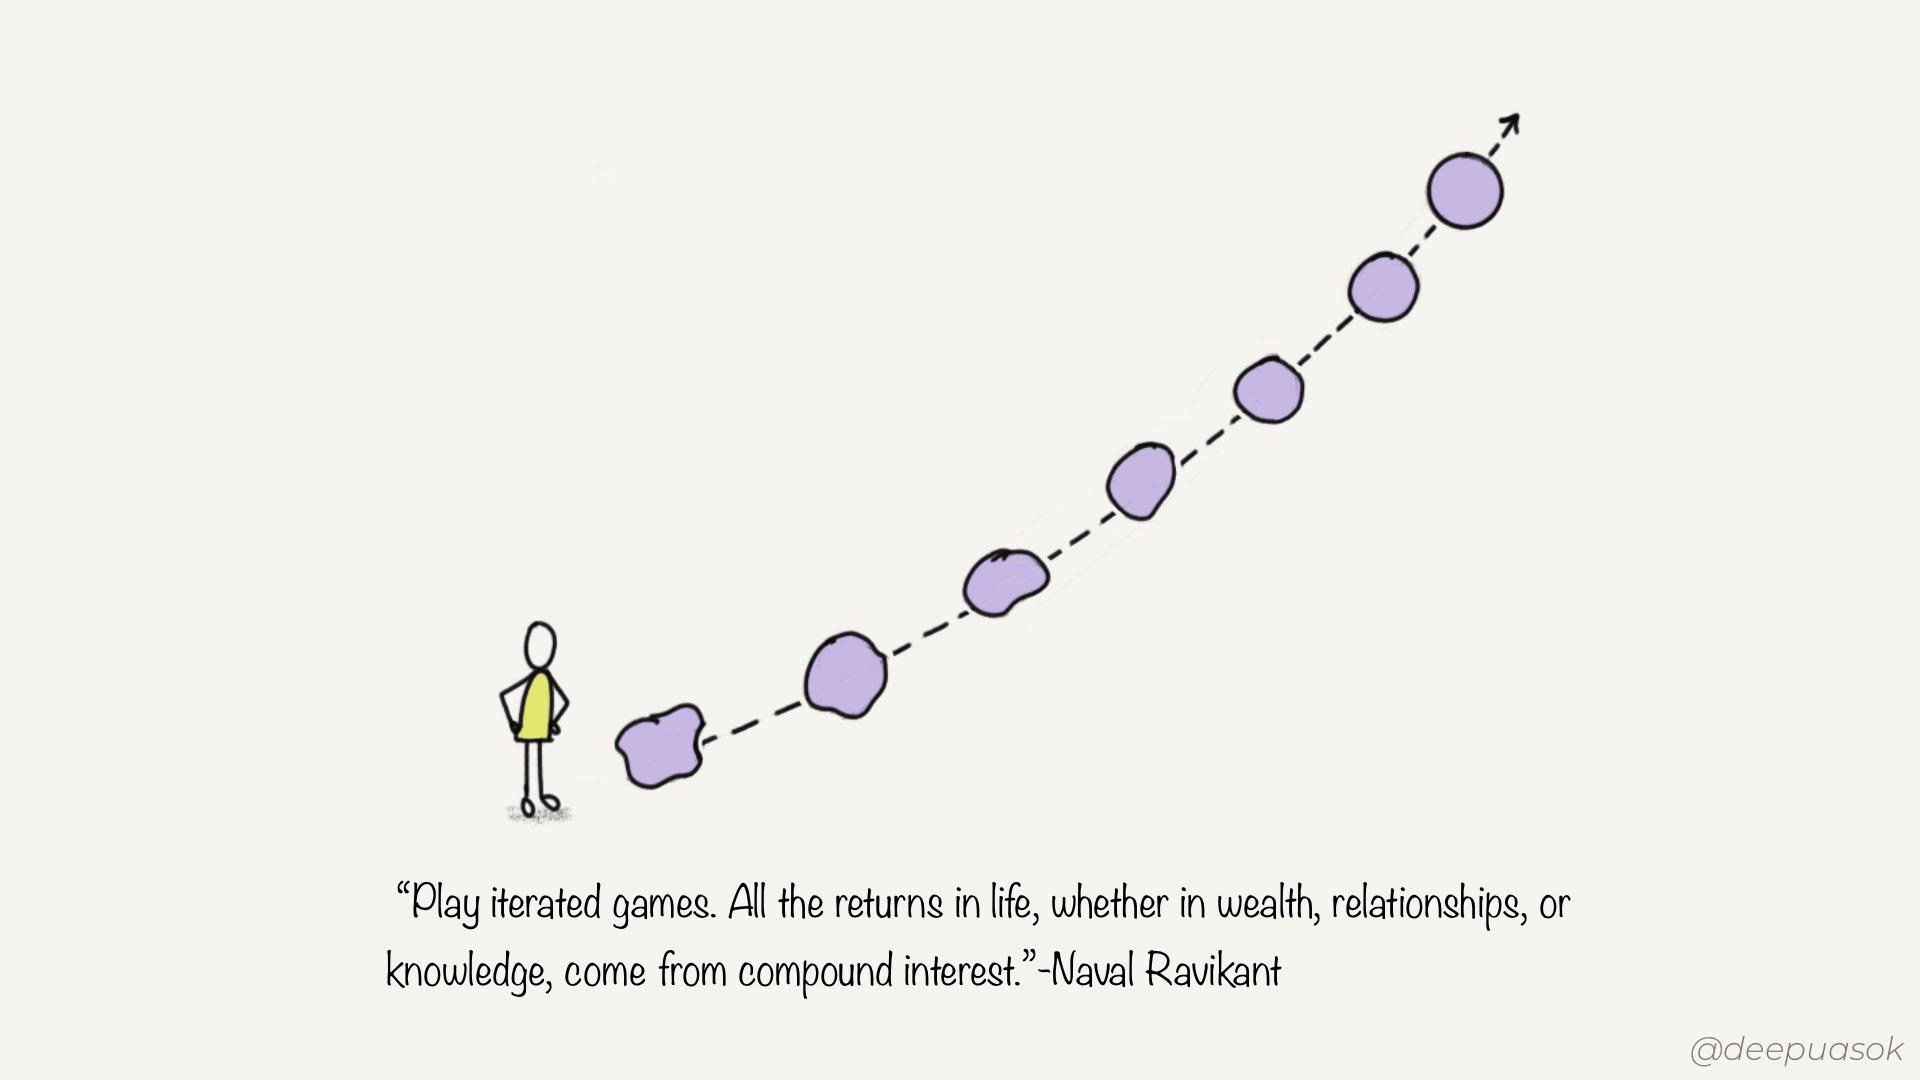 Returns come from compound interest in iterated games